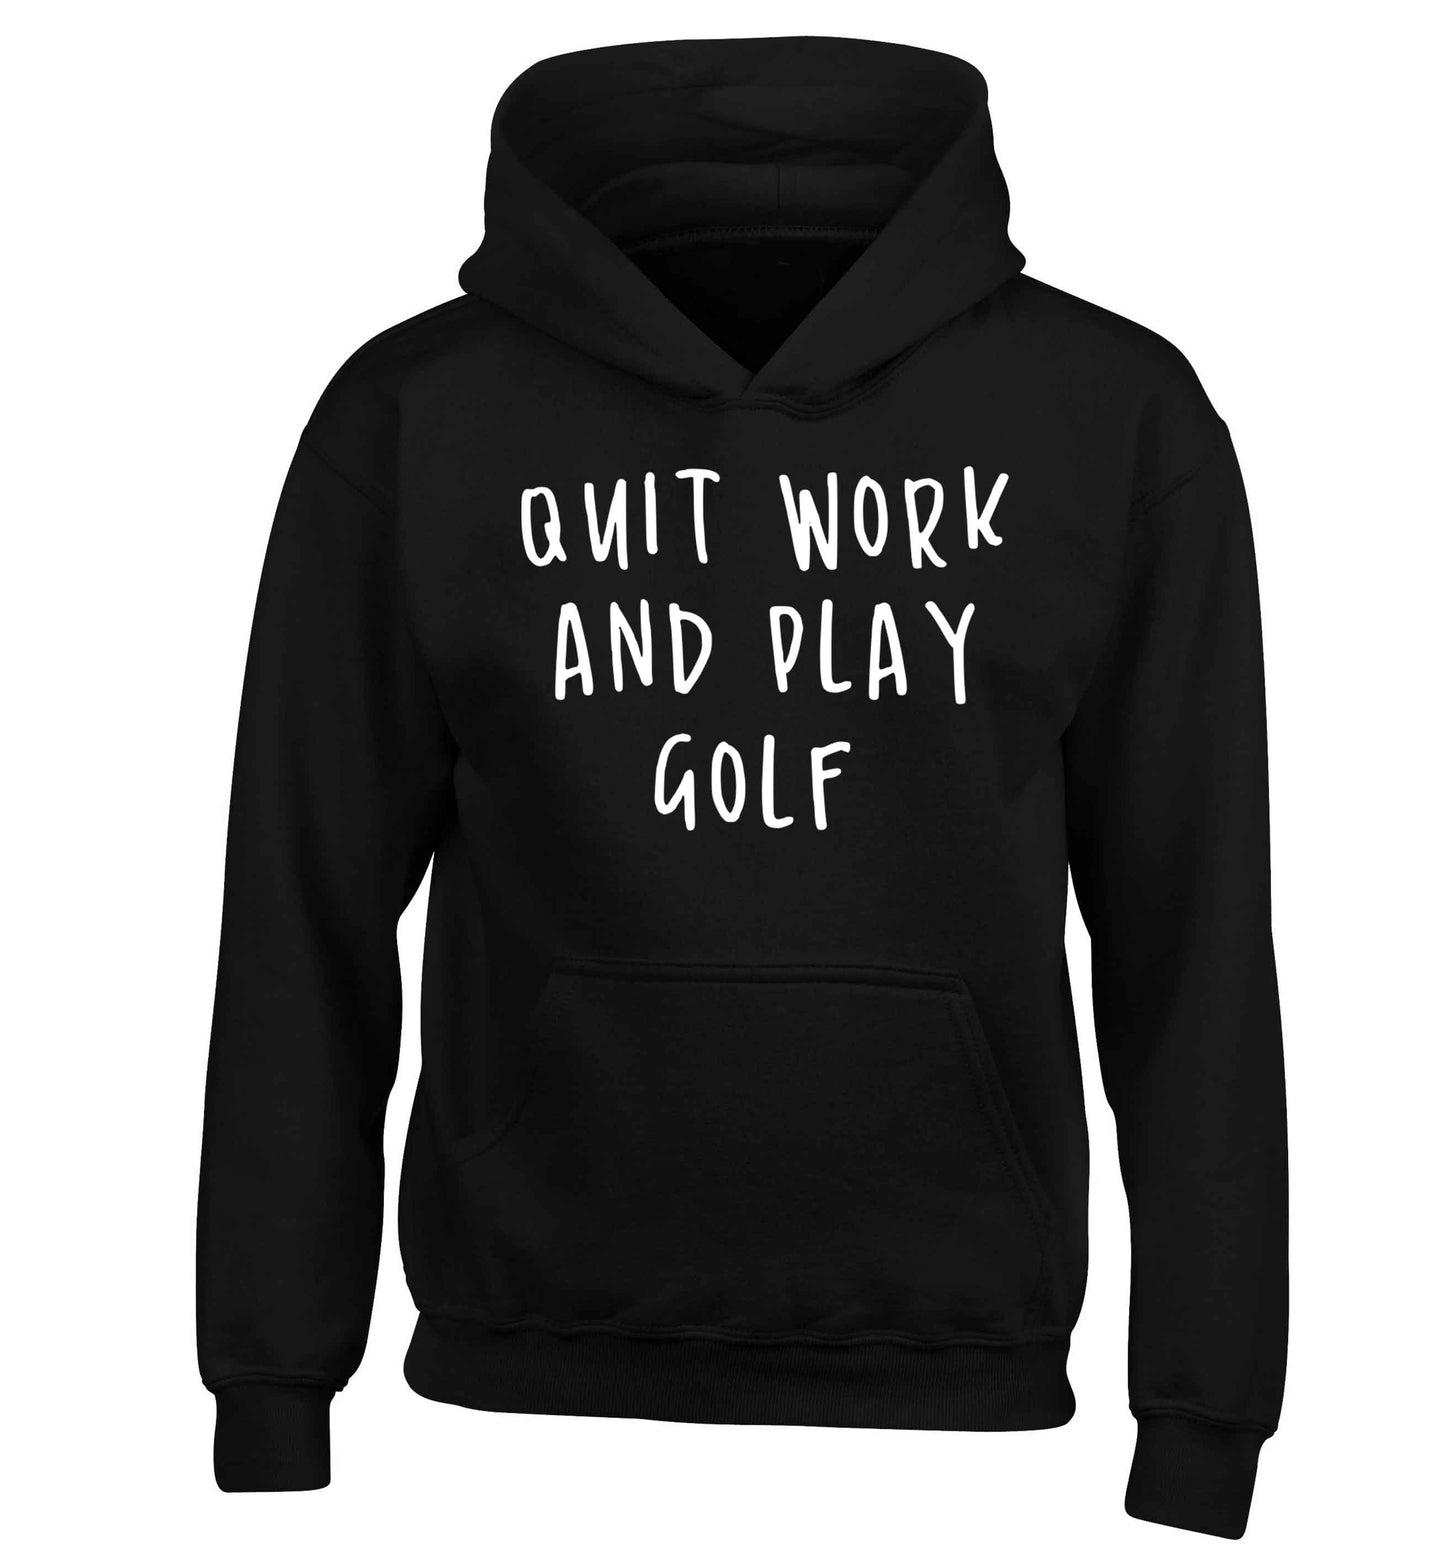 Quit work and play golf children's black hoodie 12-13 Years